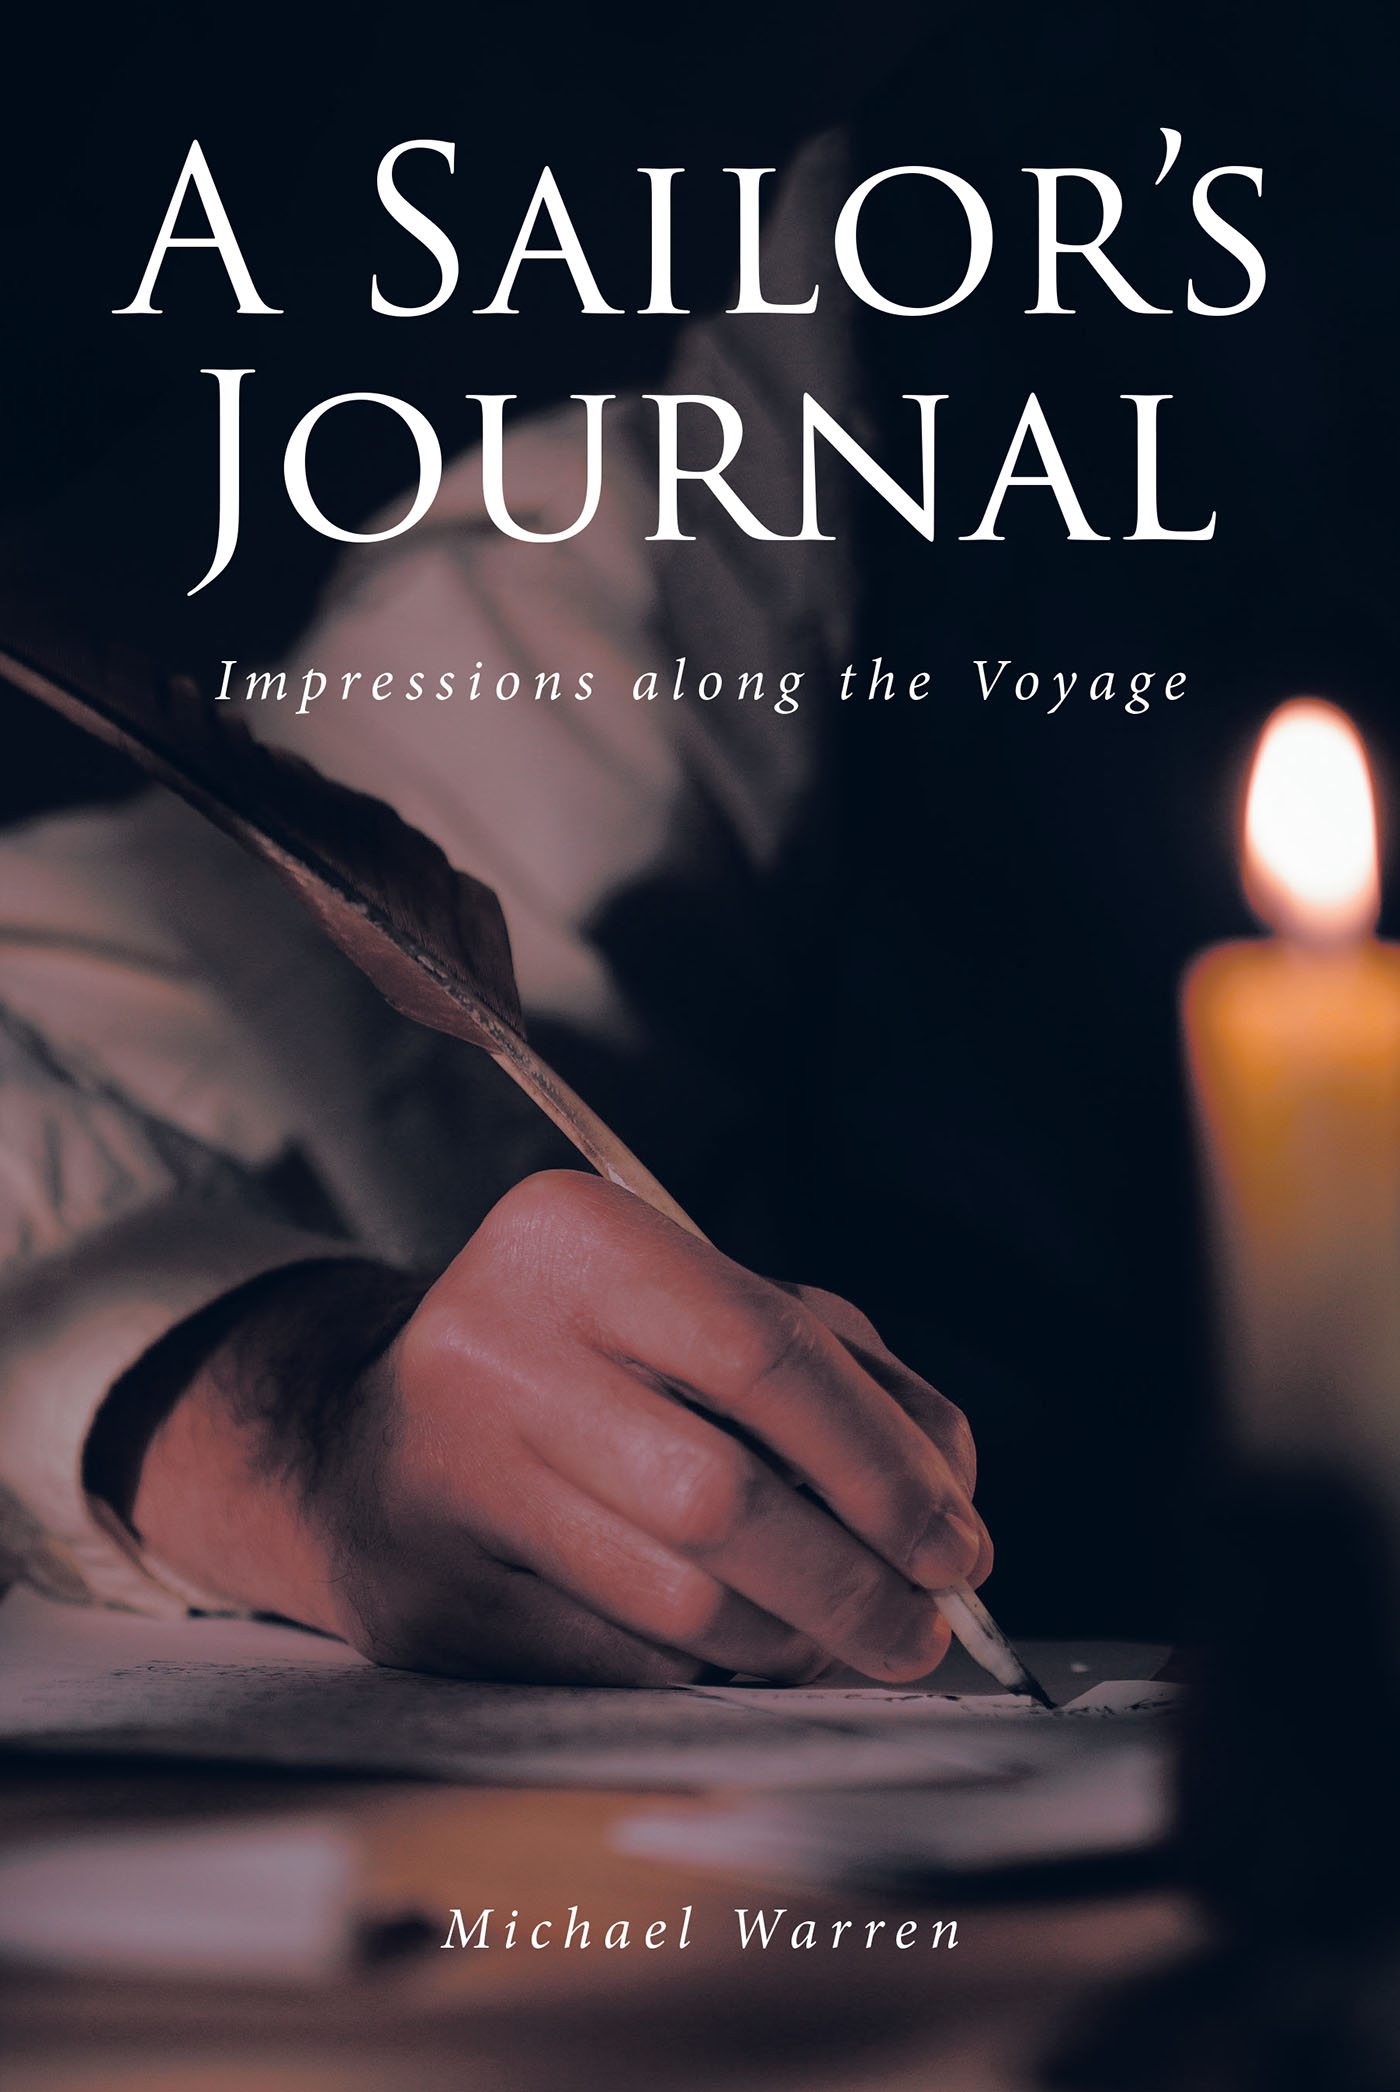 Author Michael Warren’s New Book, “A Sailor's Journal: Impressions along the Voyage,” is a Faith-Based Tale of One Man's Journey Through a Challenging Moment in His Life